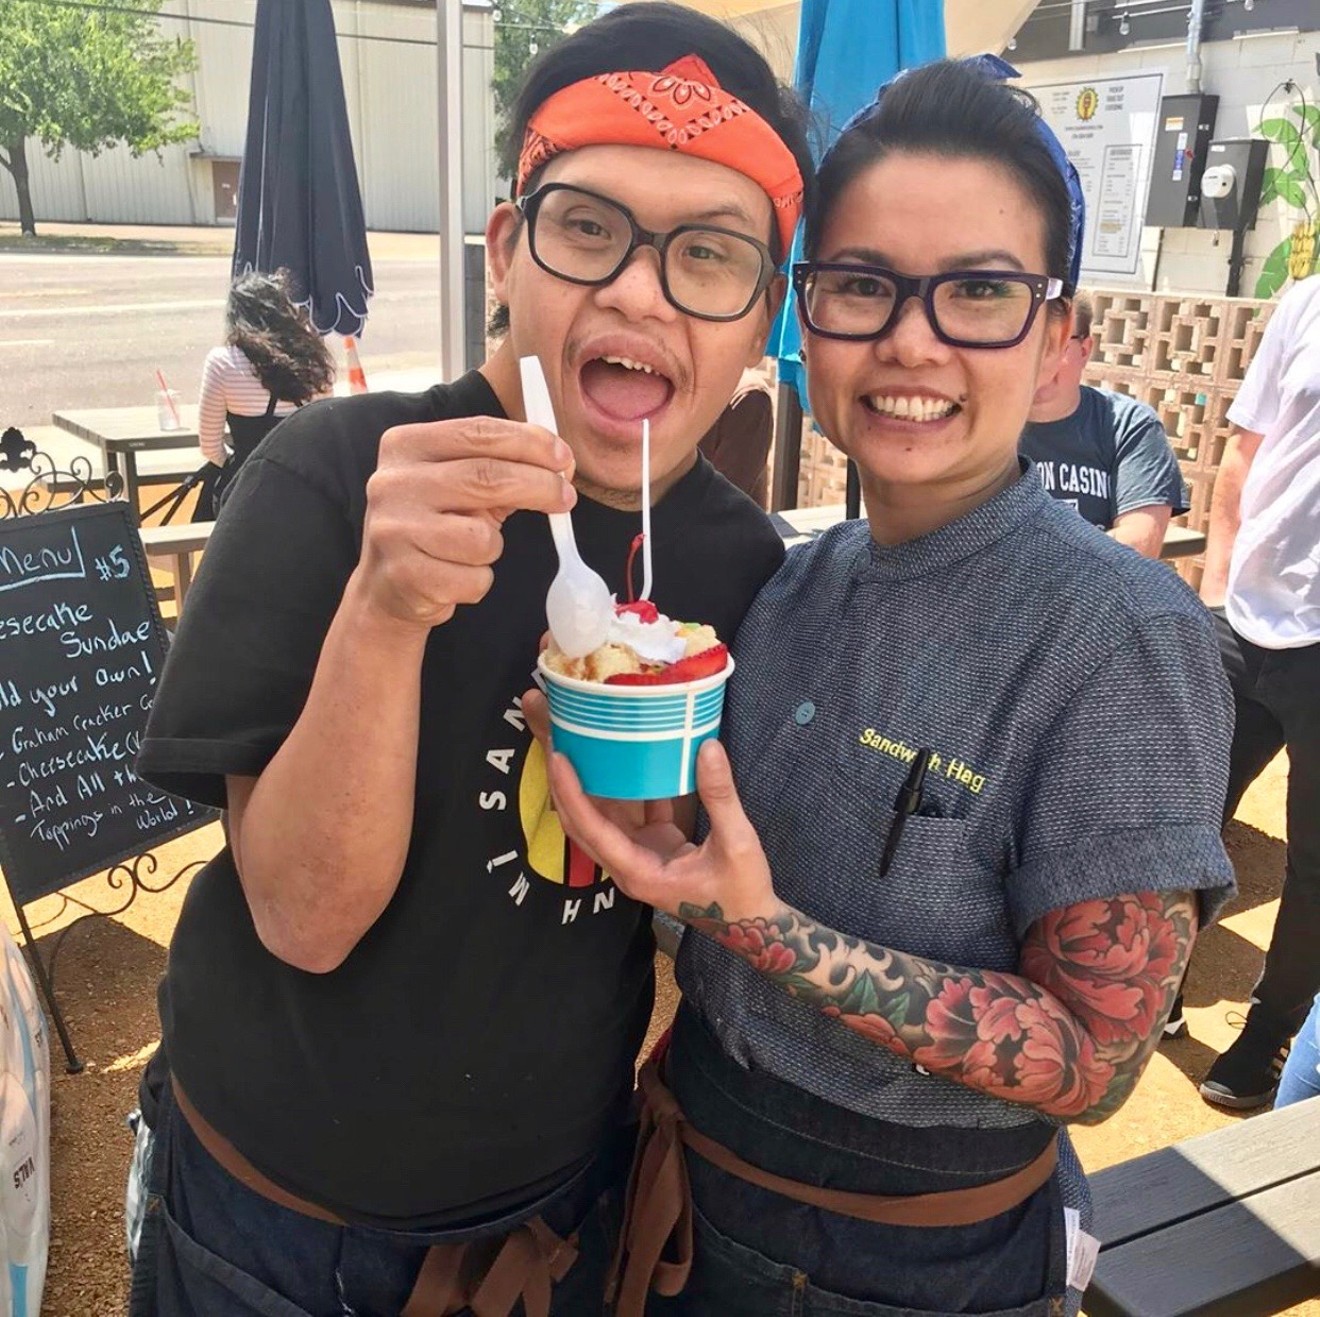 Reyna Duong (right), chef and owner of Sandwich Hag, recently reduced the restaurant's hours, with her family and team in mind.